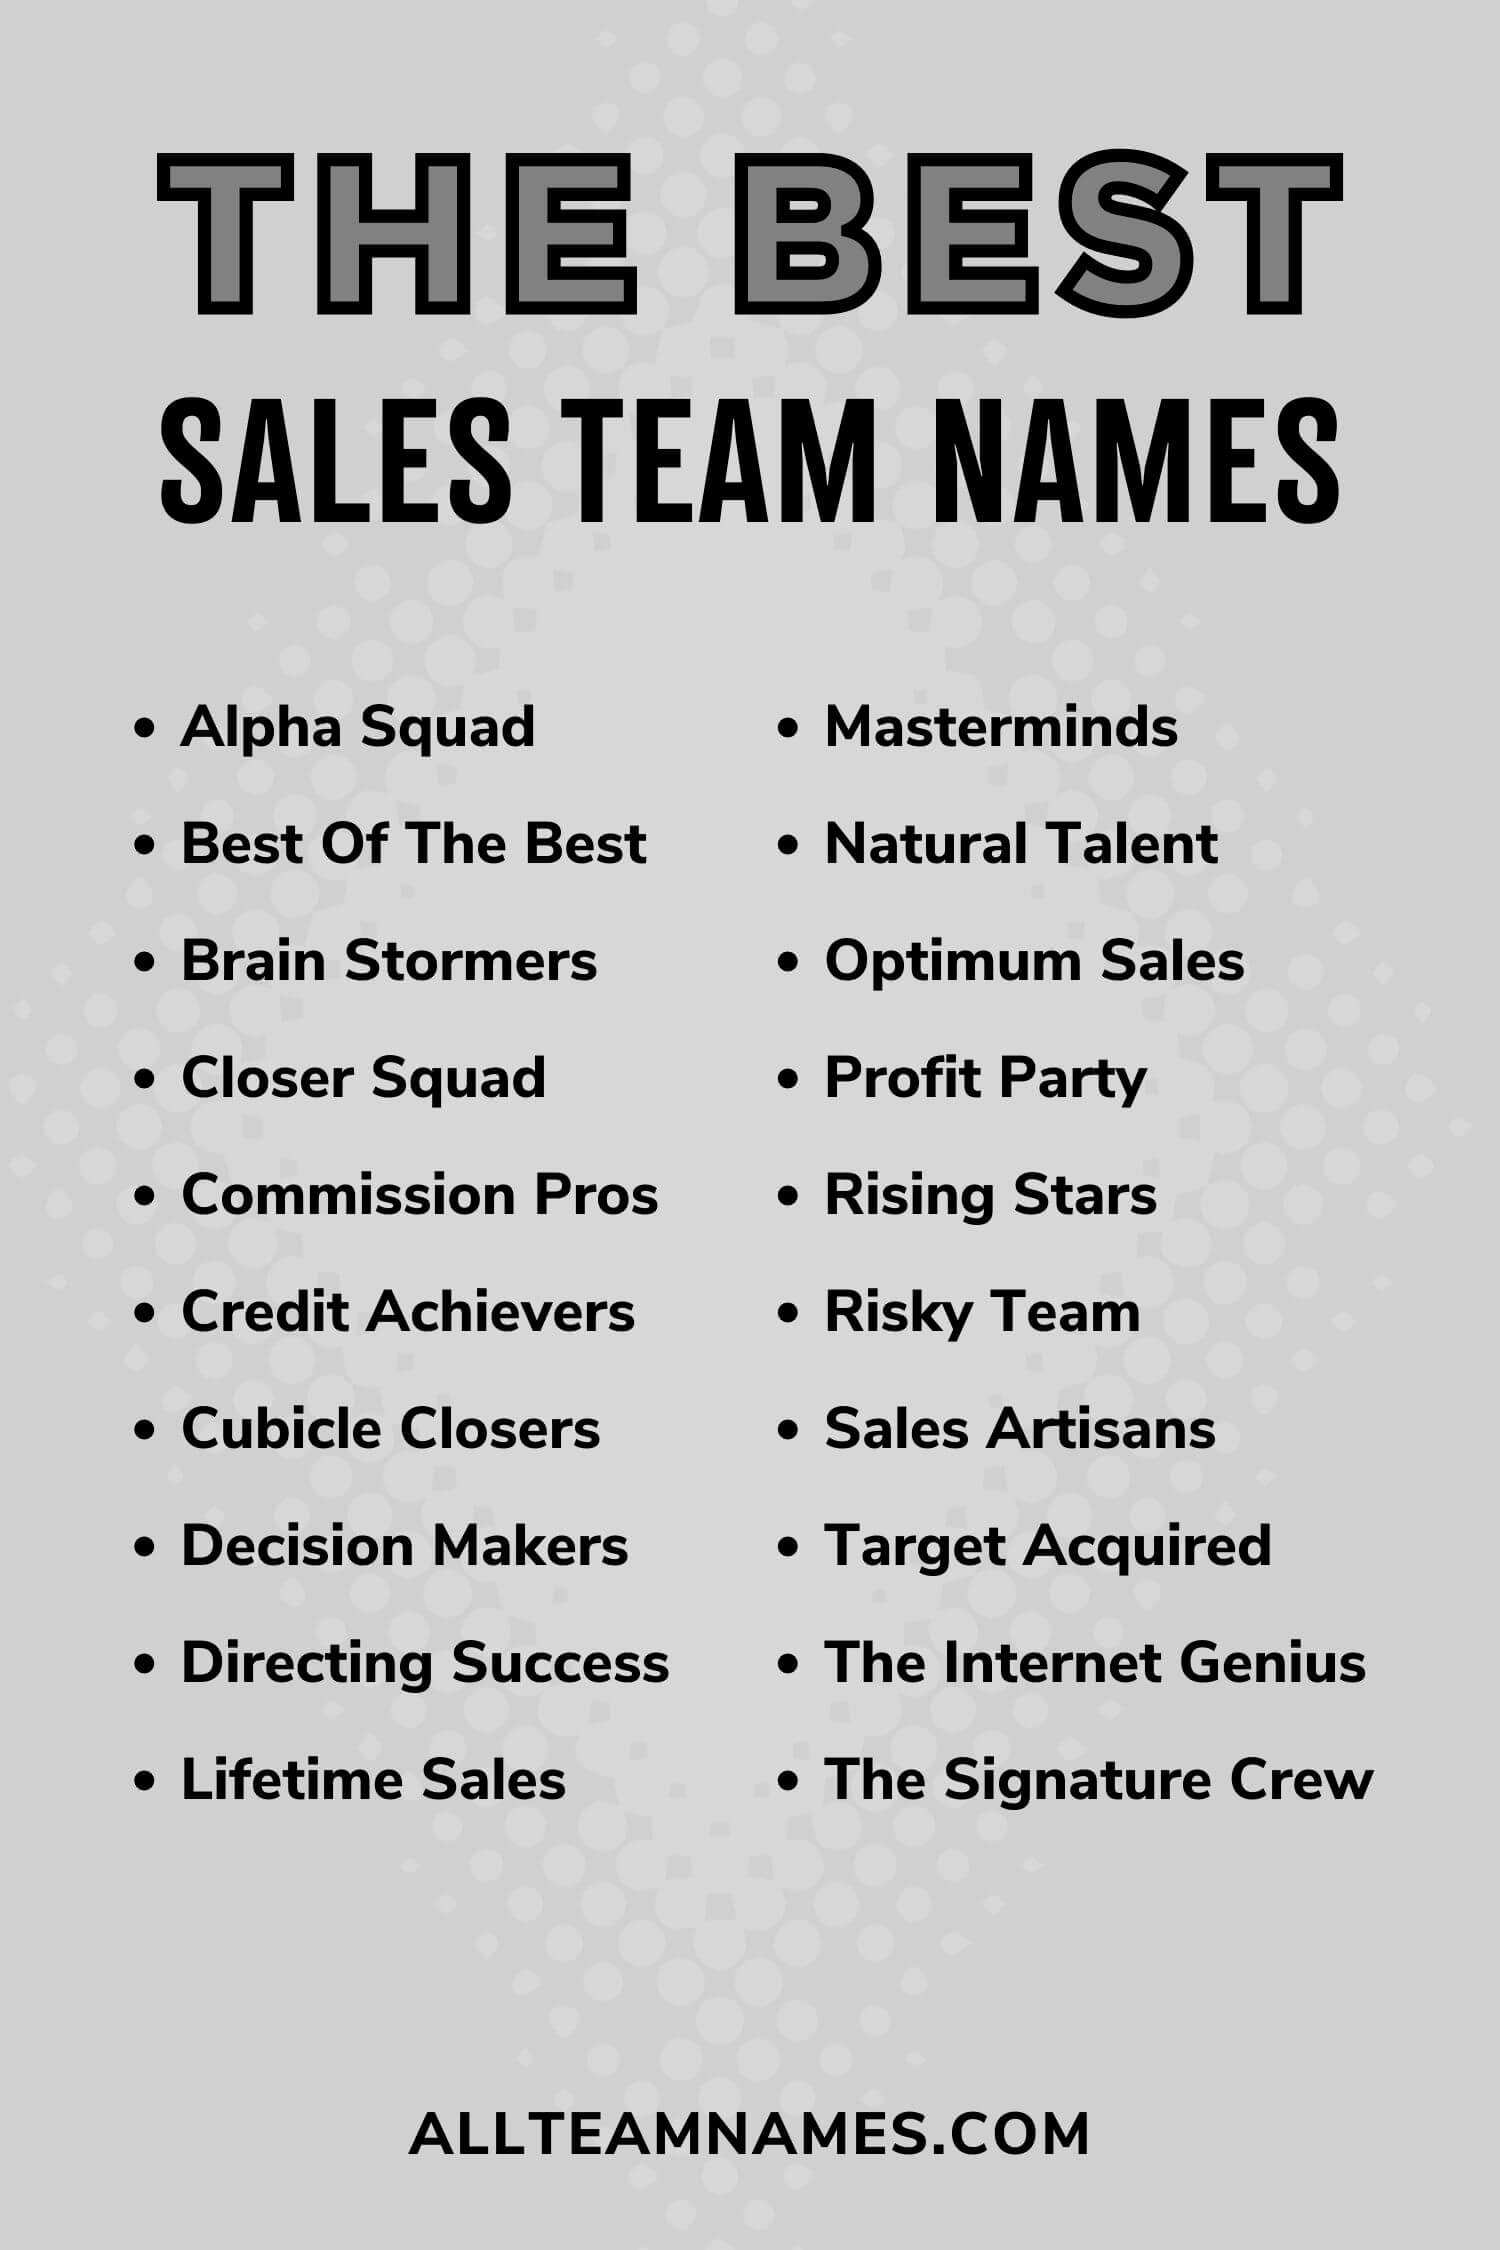 The 125 Best Sales Team Names Ever. No Question. Point Blank. Period.